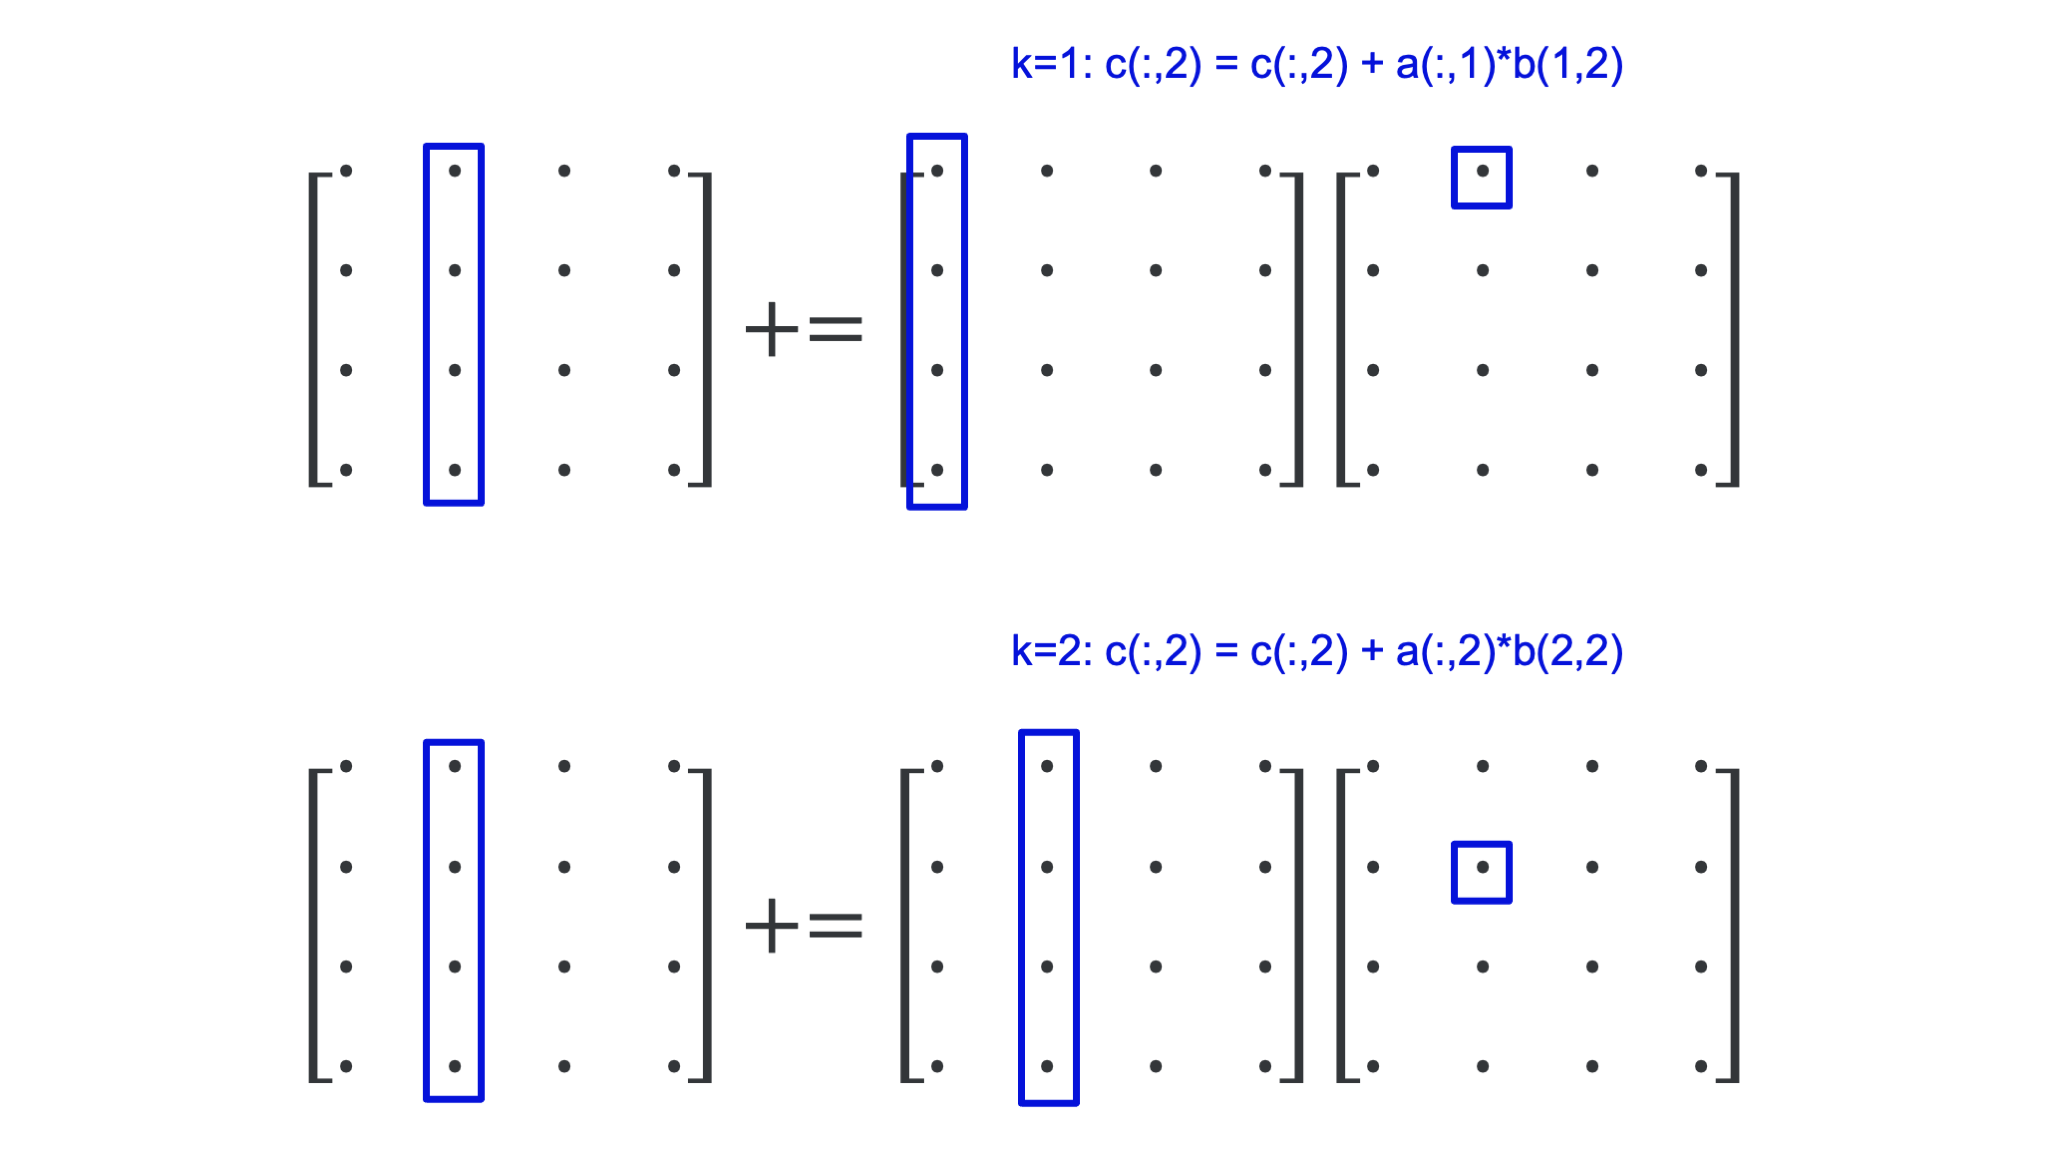 Steps 1 and 2 of the matrix multiplication